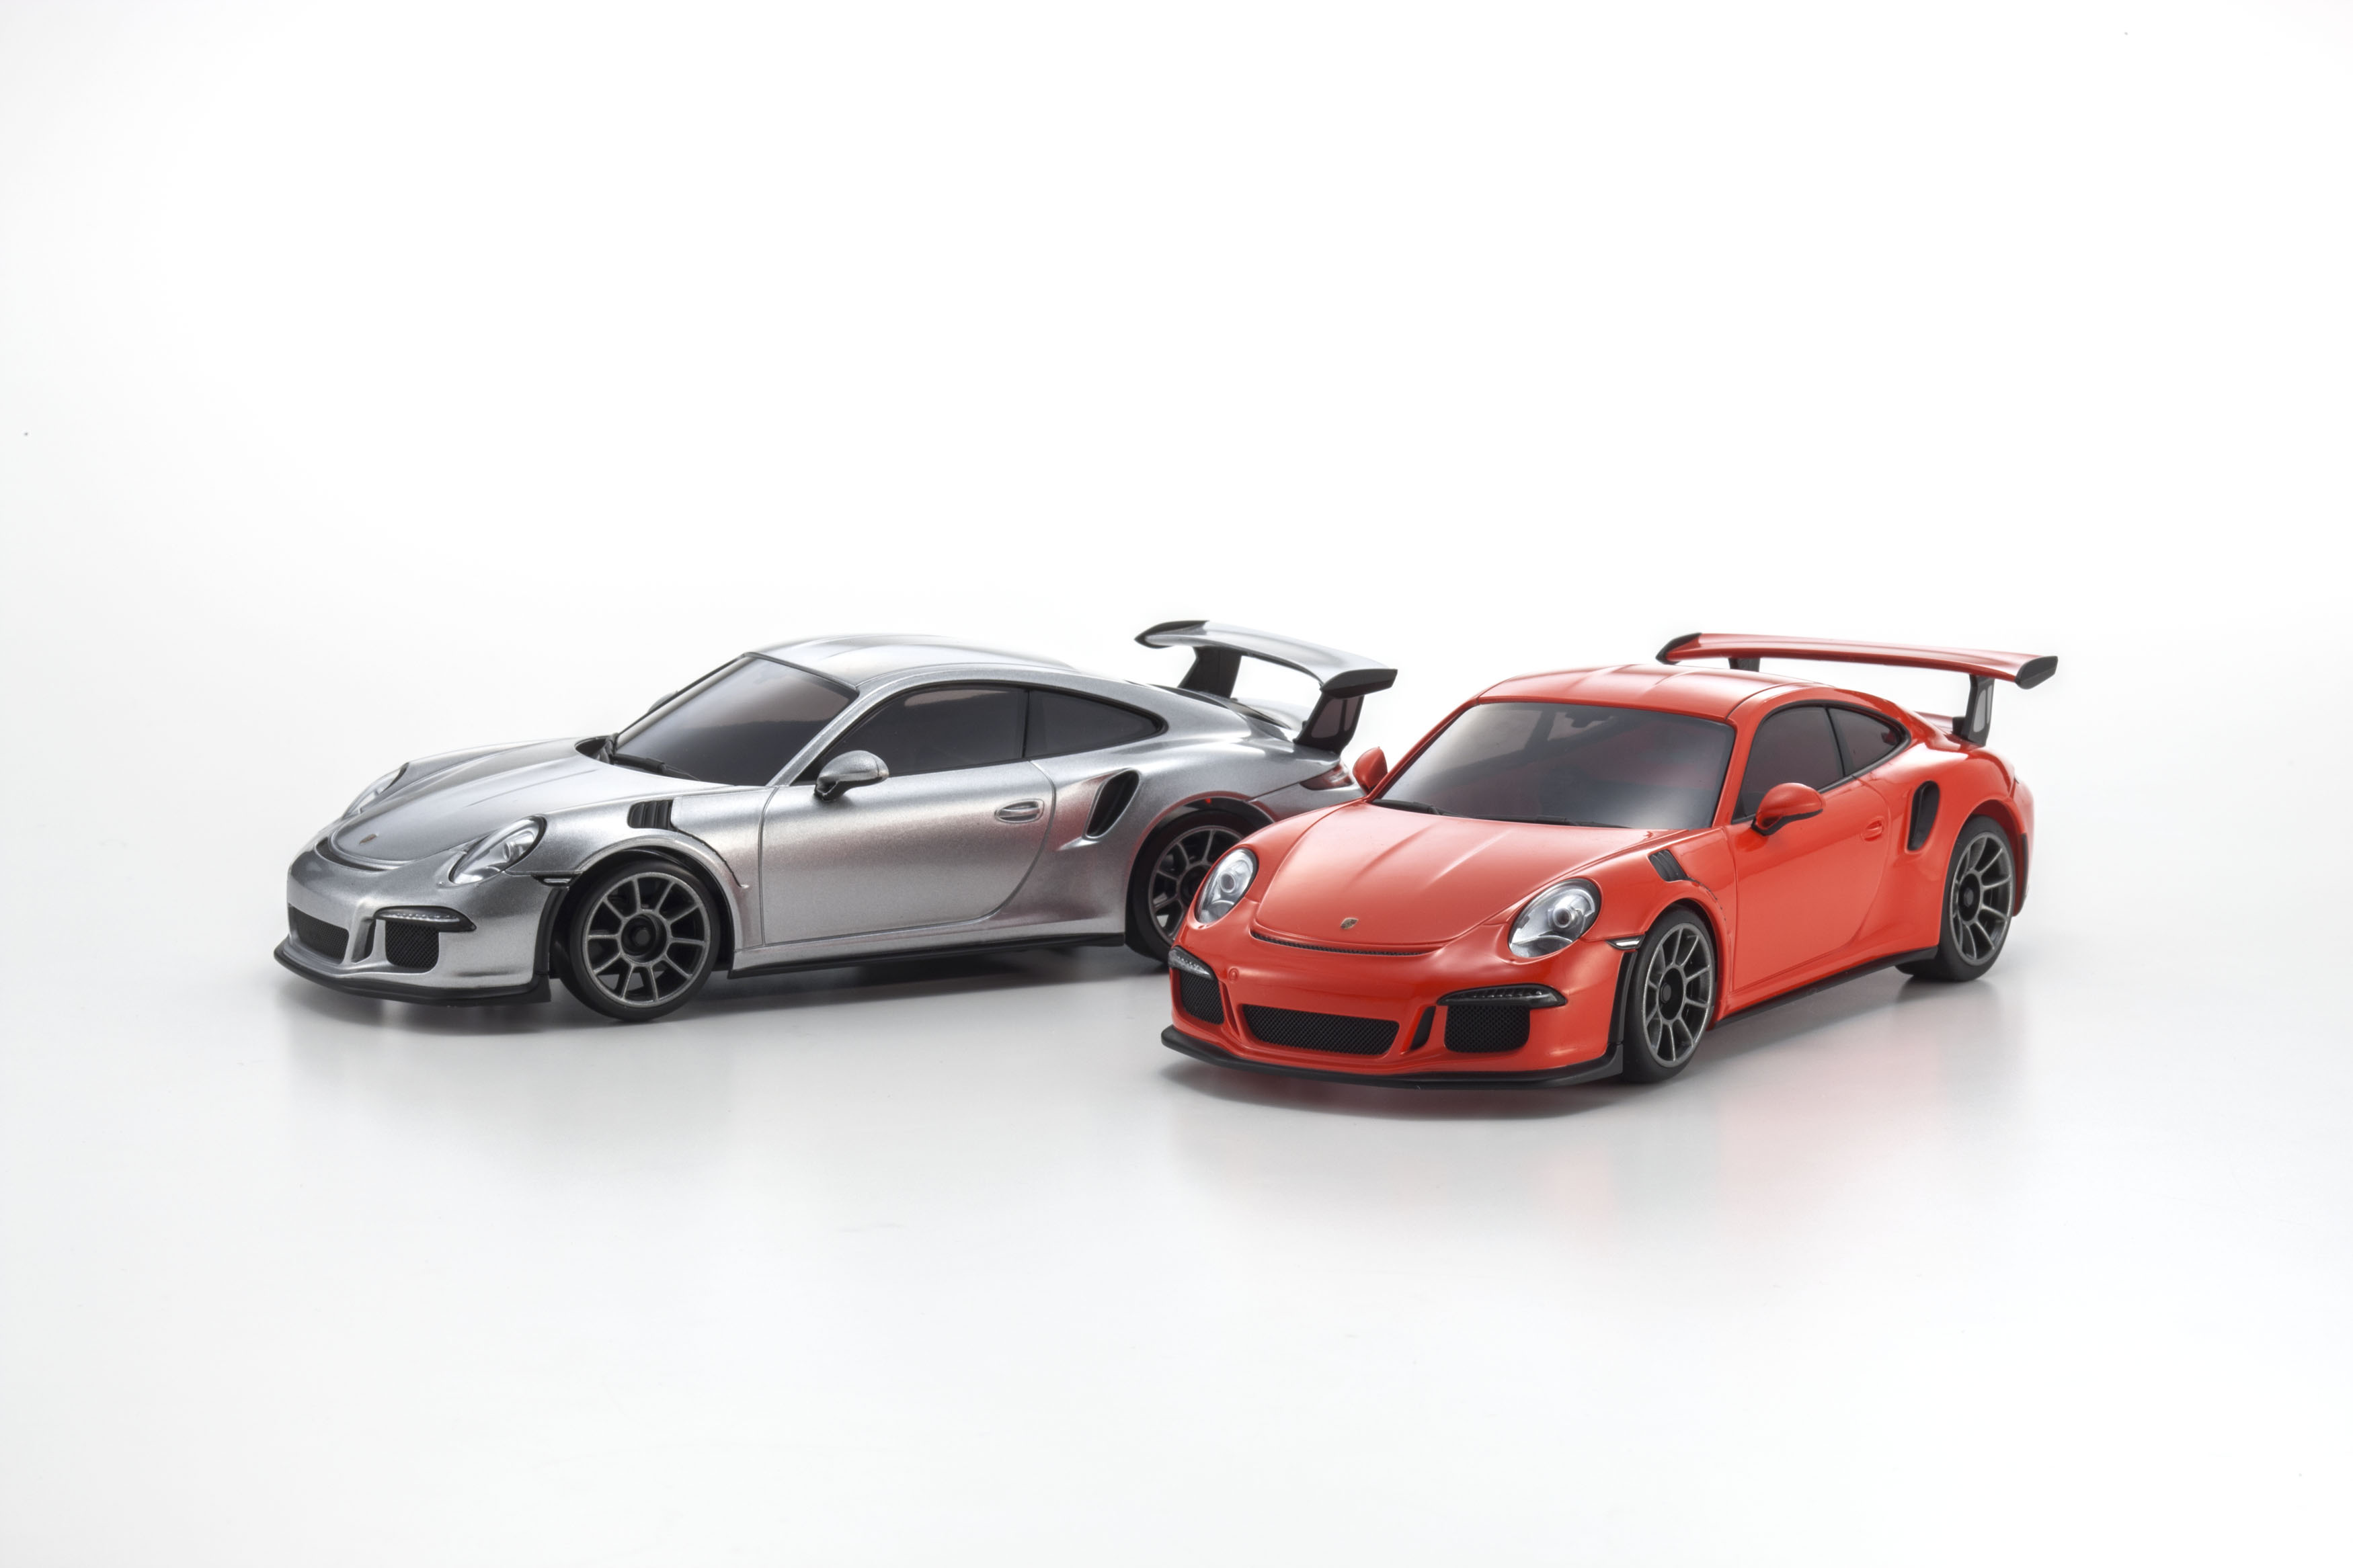 [:en]MINIZ MR03 SPORTS 2 PORSCHE 911 GT3 RS Available late May 2017[:fr]MINIZ MR03 SPORTS 2 PORSCHE 911 GT3 RS disponible fin Mai 2017[:de]MINIZ MR03 SPORTS 2 PORSCHE 911 GT3 RS Available late May 2017[:]